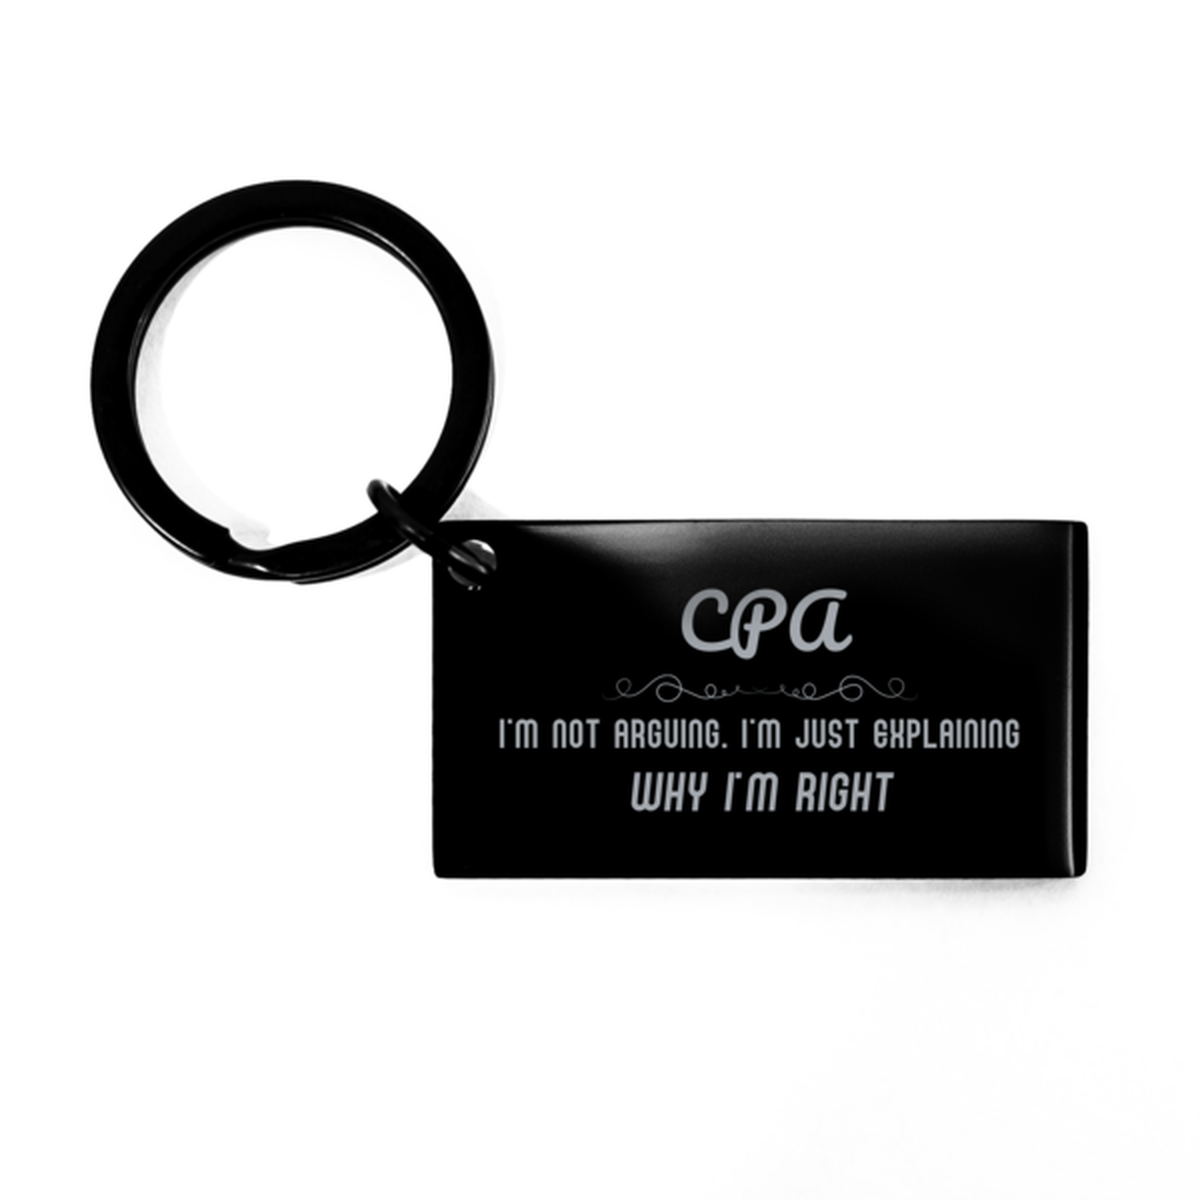 CPA I'm not Arguing. I'm Just Explaining Why I'm RIGHT Keychain, Funny Saying Quote CPA Gifts For CPA Graduation Birthday Christmas Gifts for Men Women Coworker